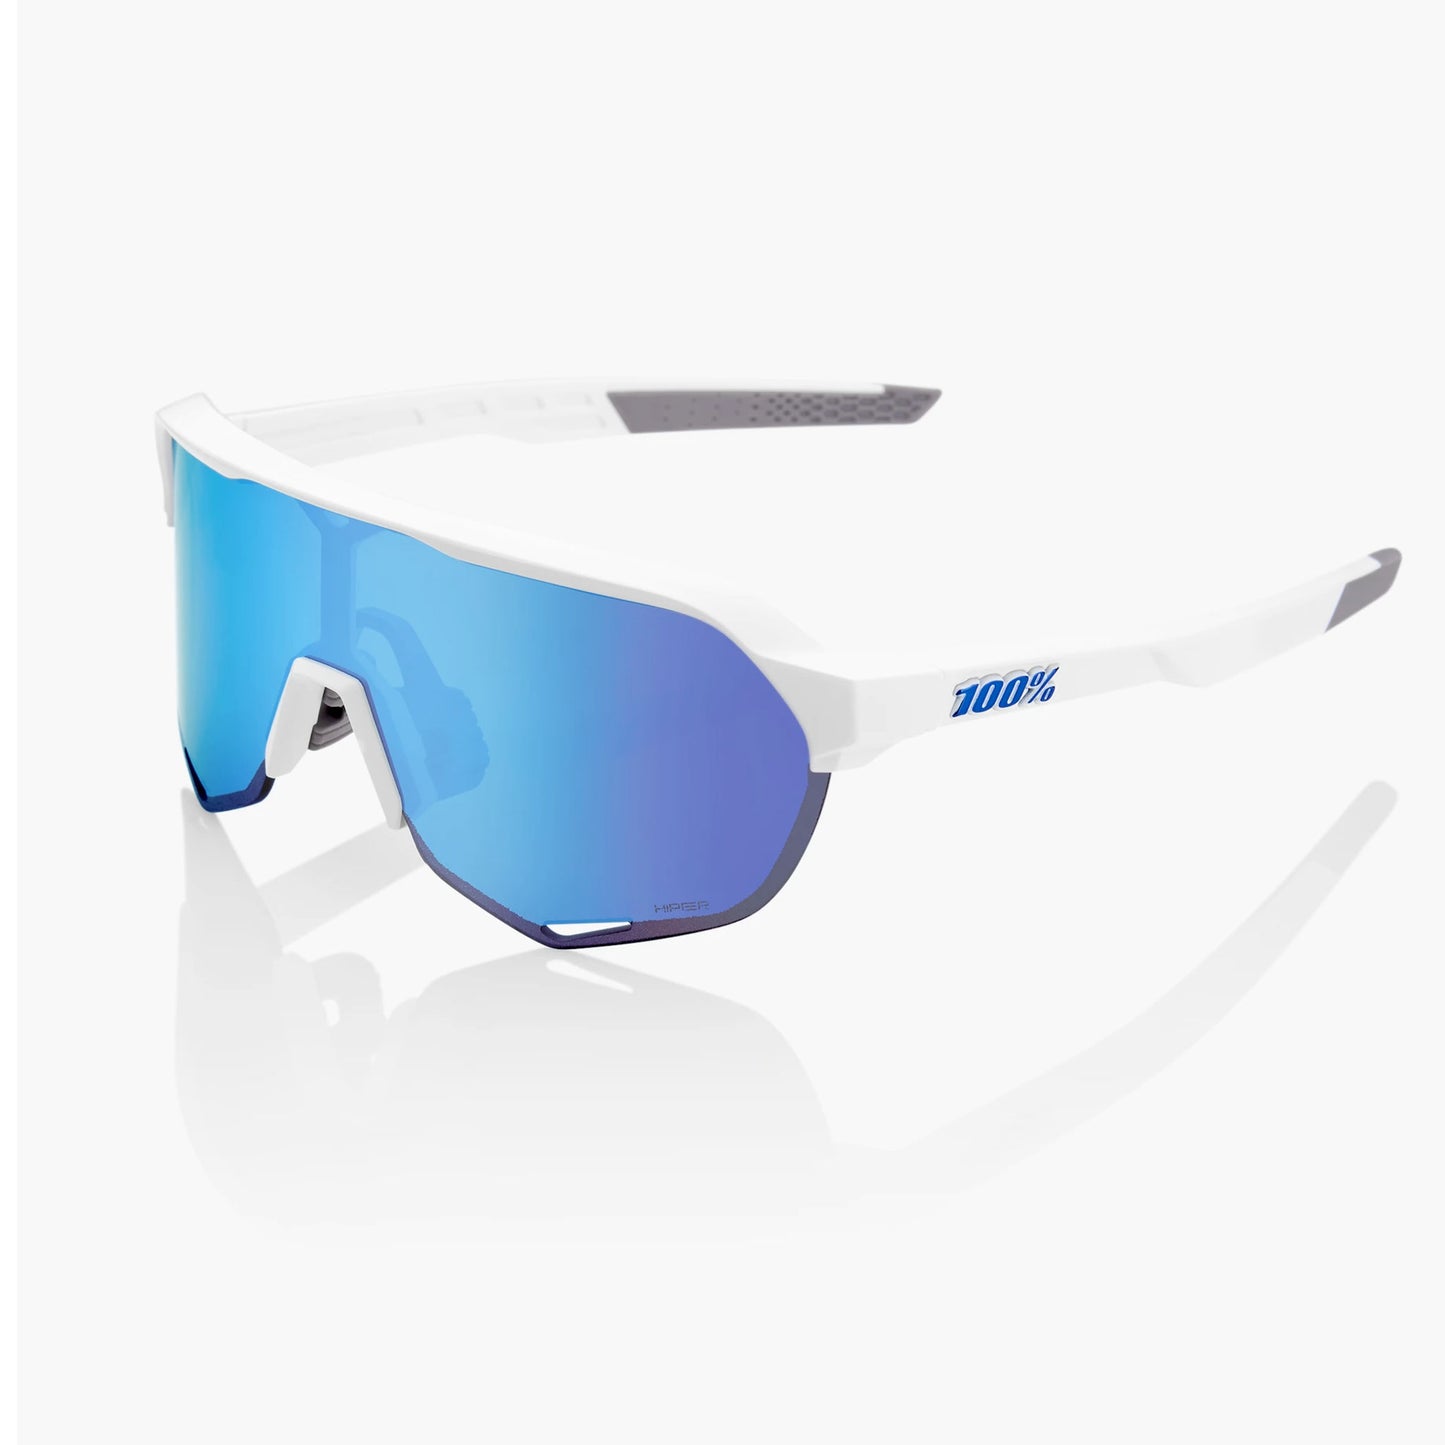 100% S2 Cycling Sunglasses - Matt White with HiPER Blue Multilayer Mirror Lens + Clear Lens